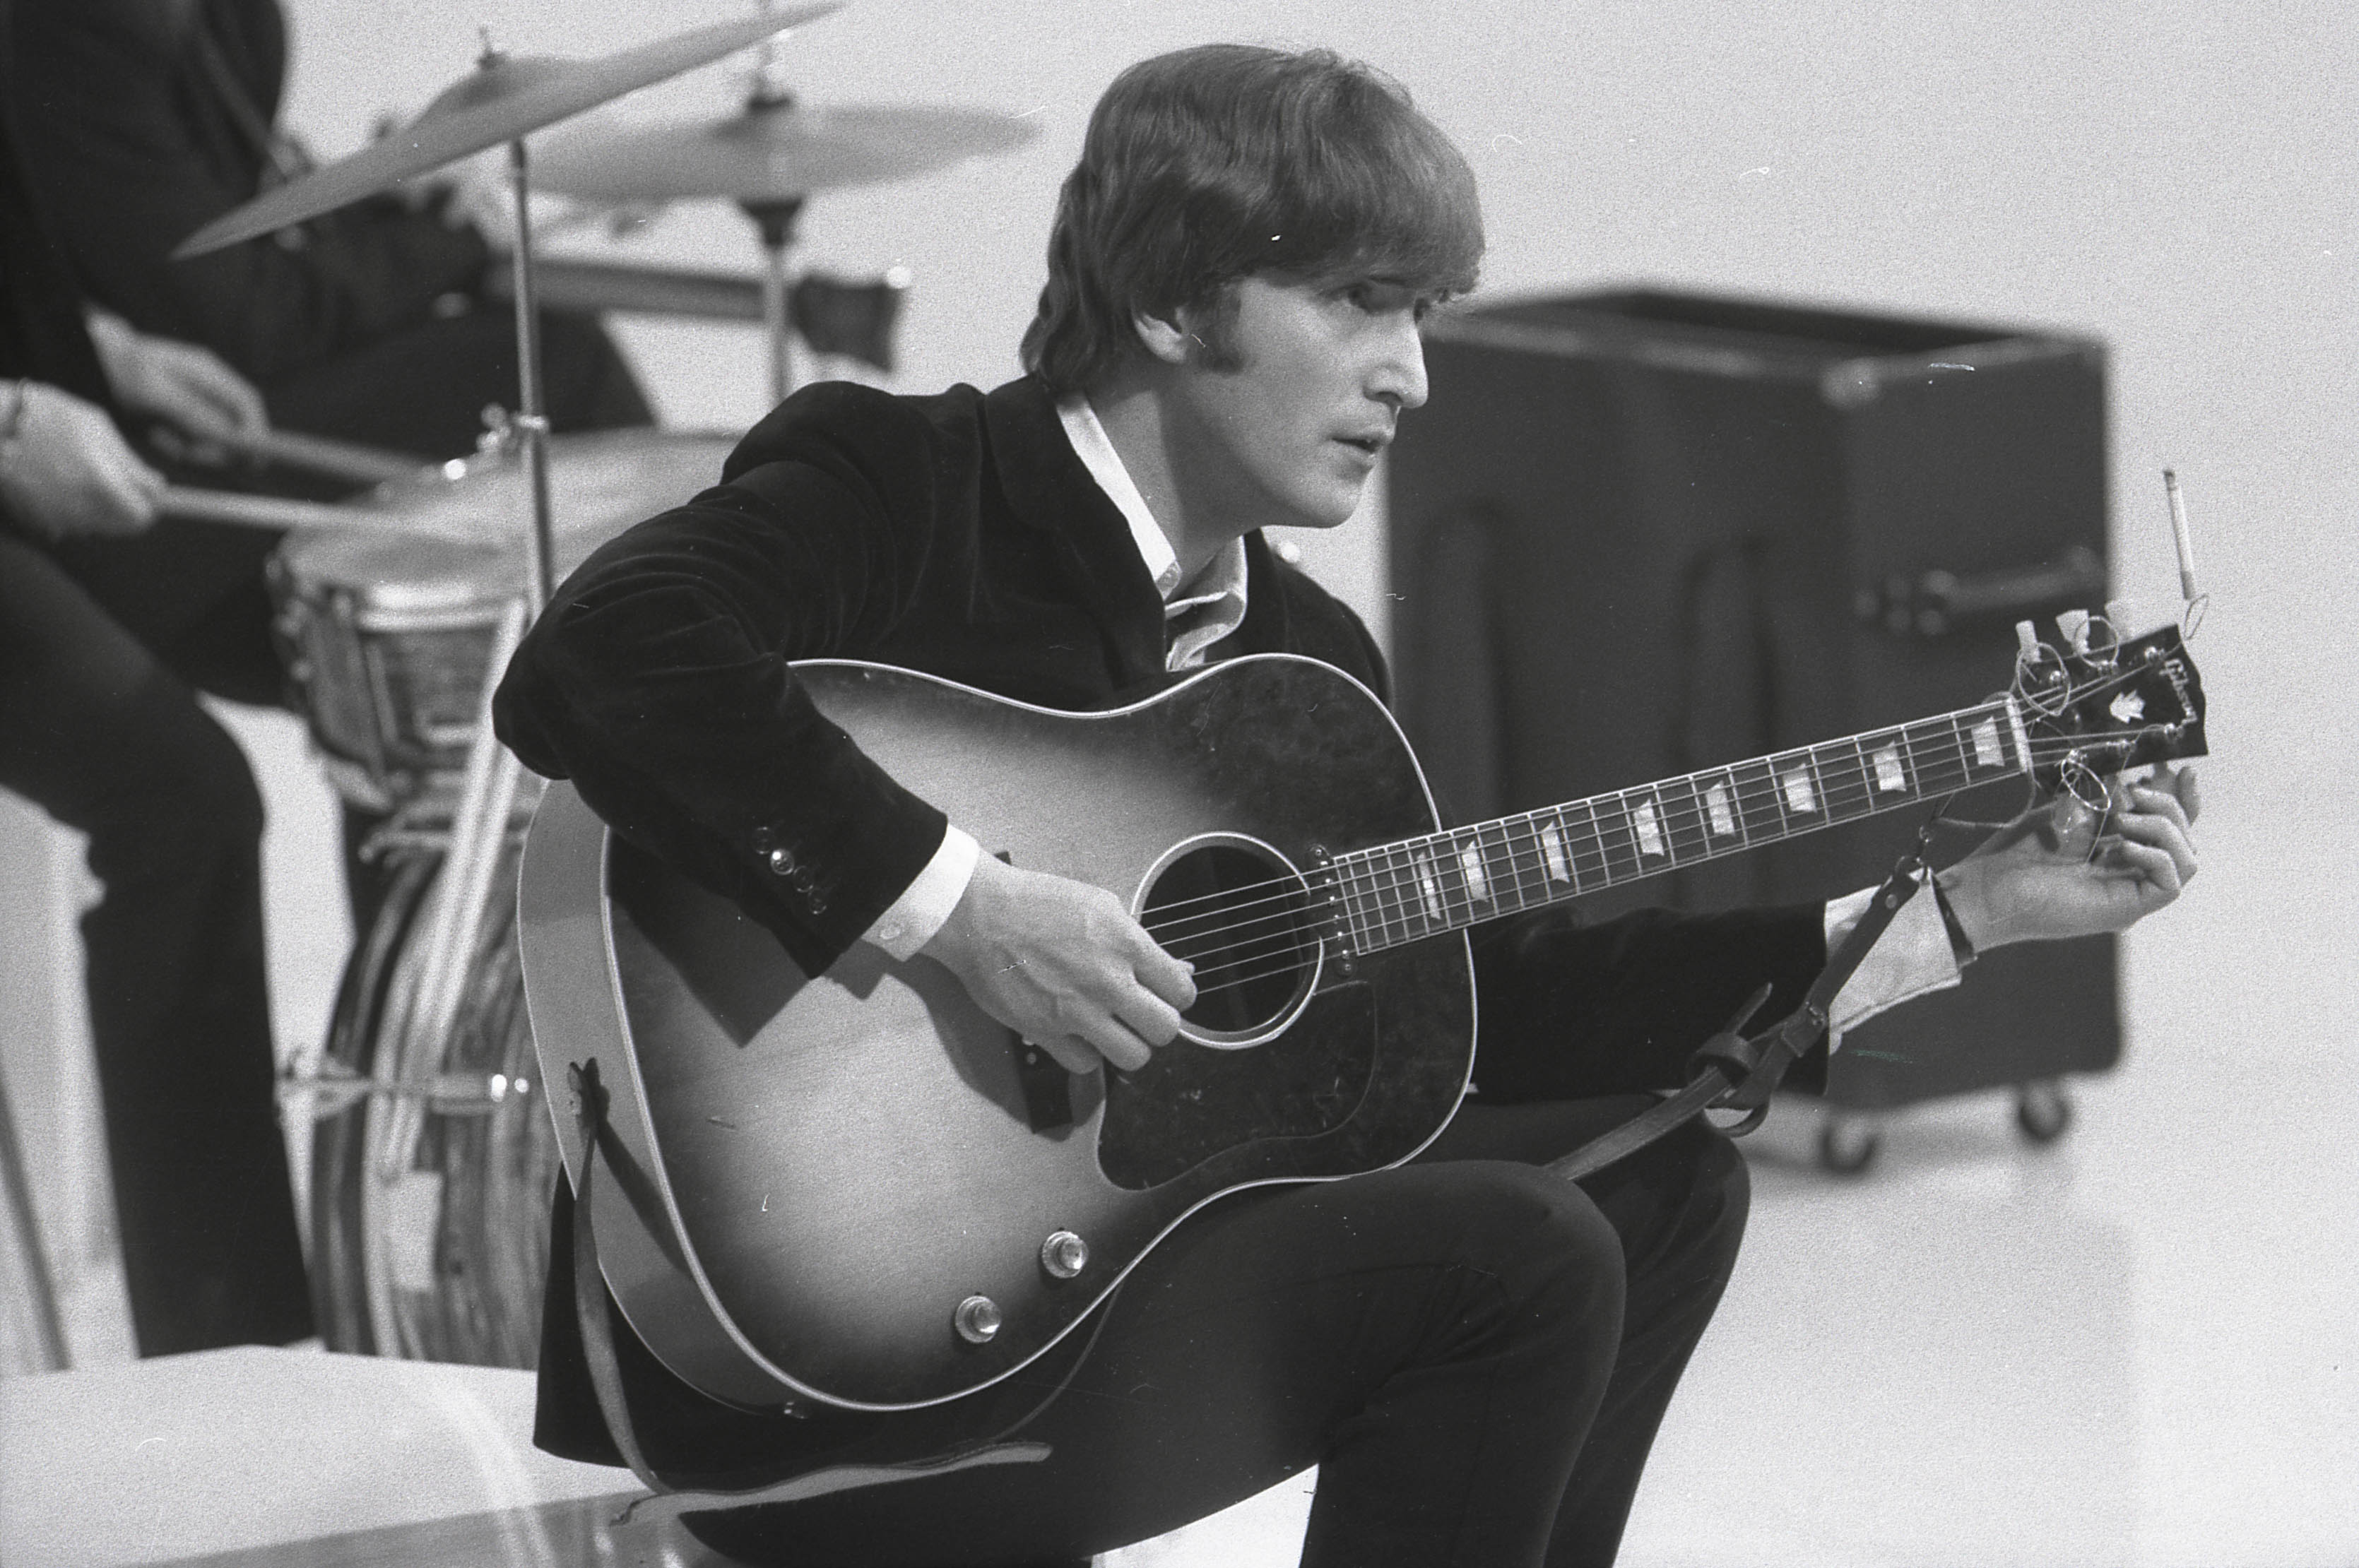 John Lennon Didn’t ‘Even Want to Think About’ The Beatles’ ‘Honey Pie’